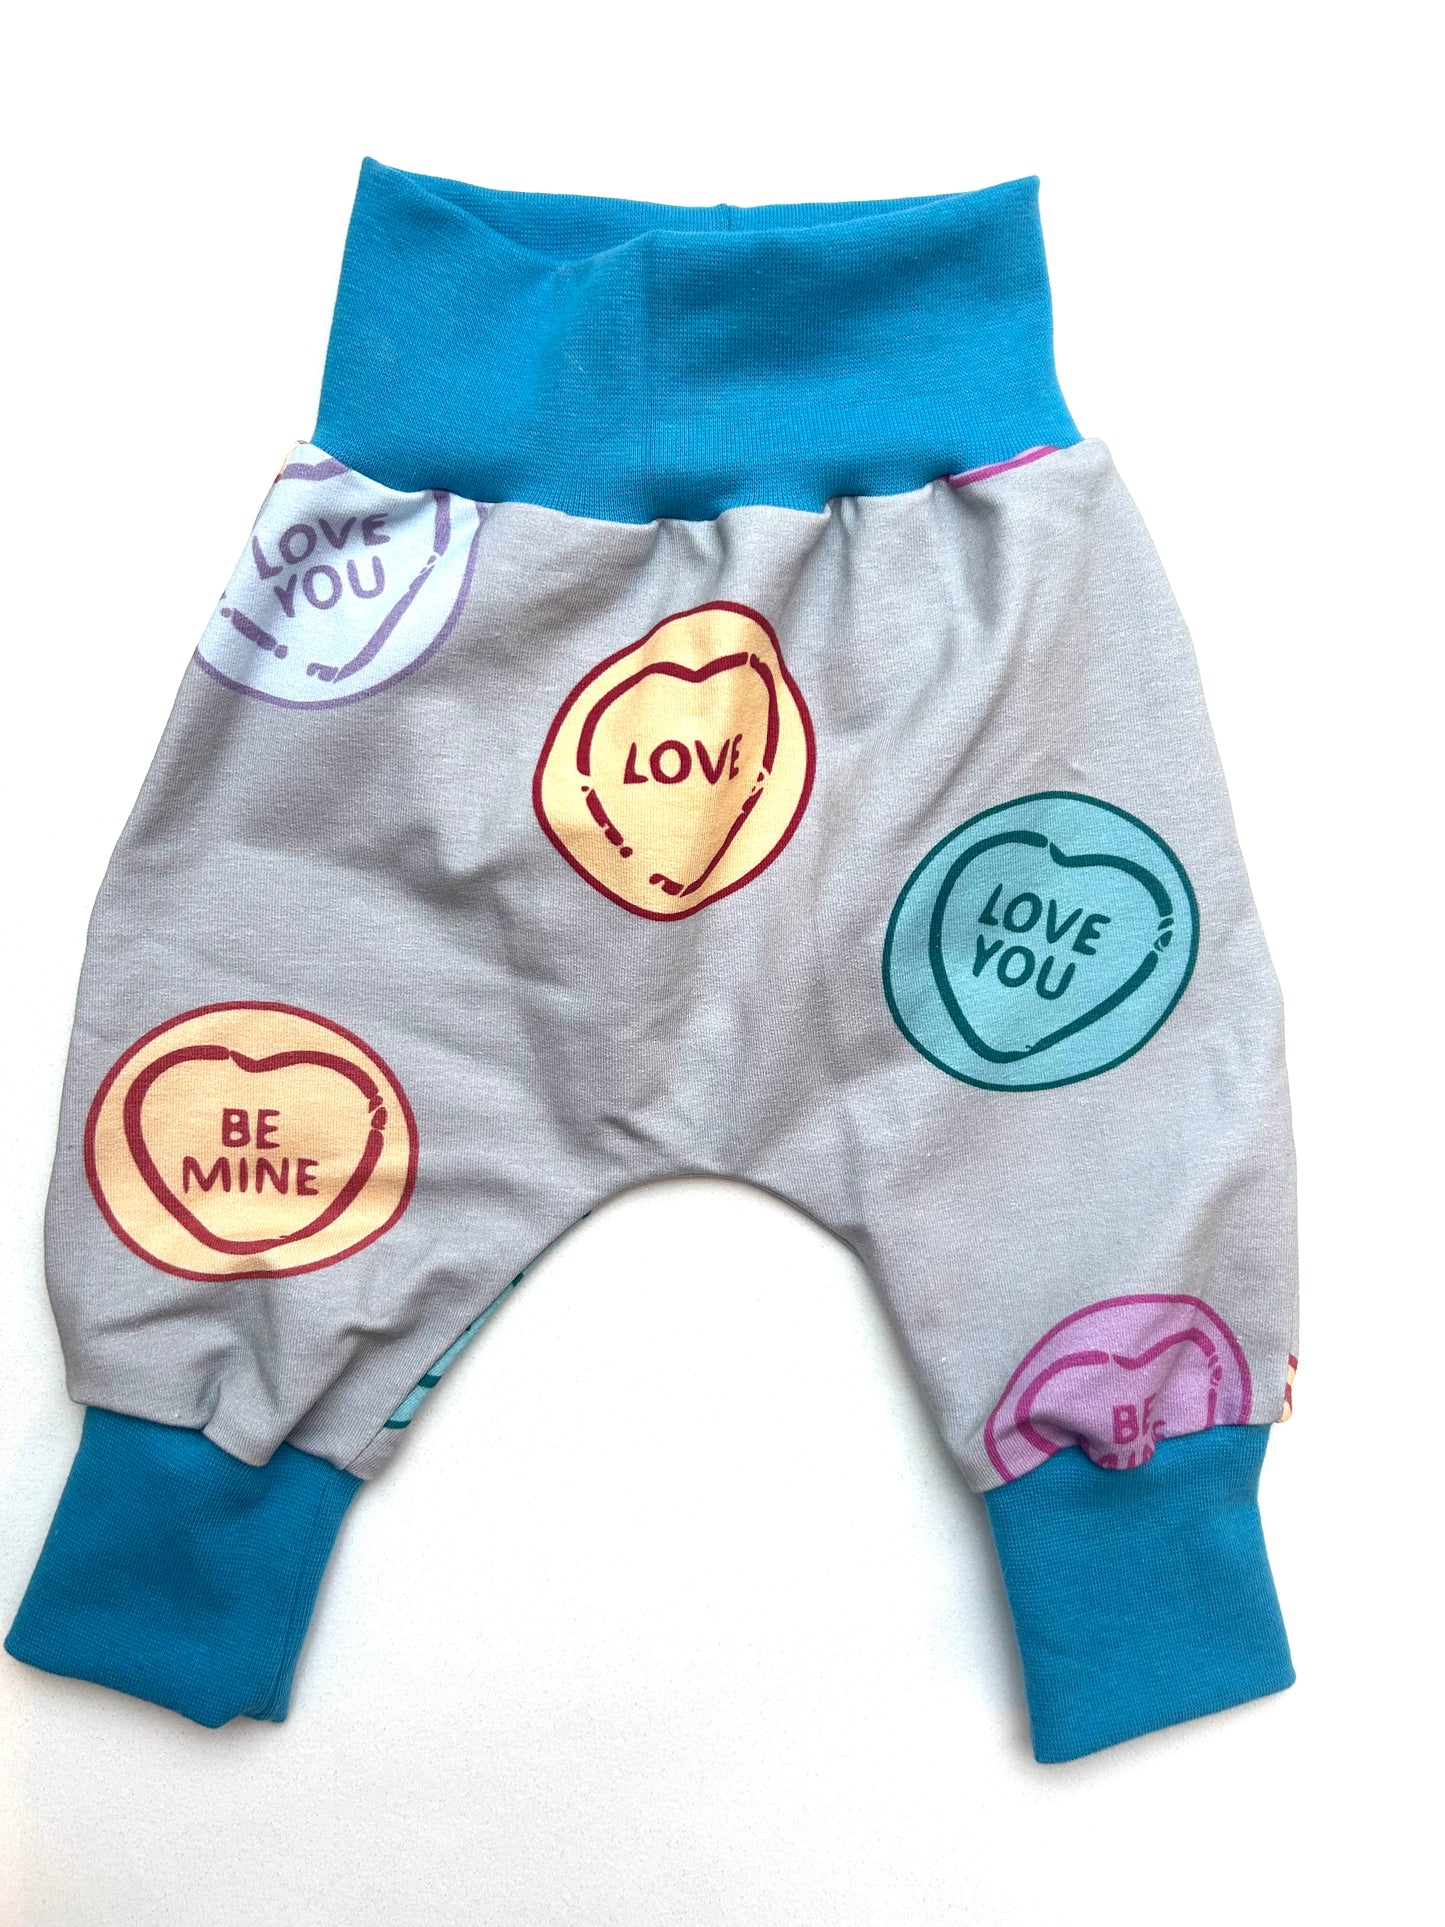 Love Hearts Jersey Baby & Toddler Harem Pants Pink Cuffs